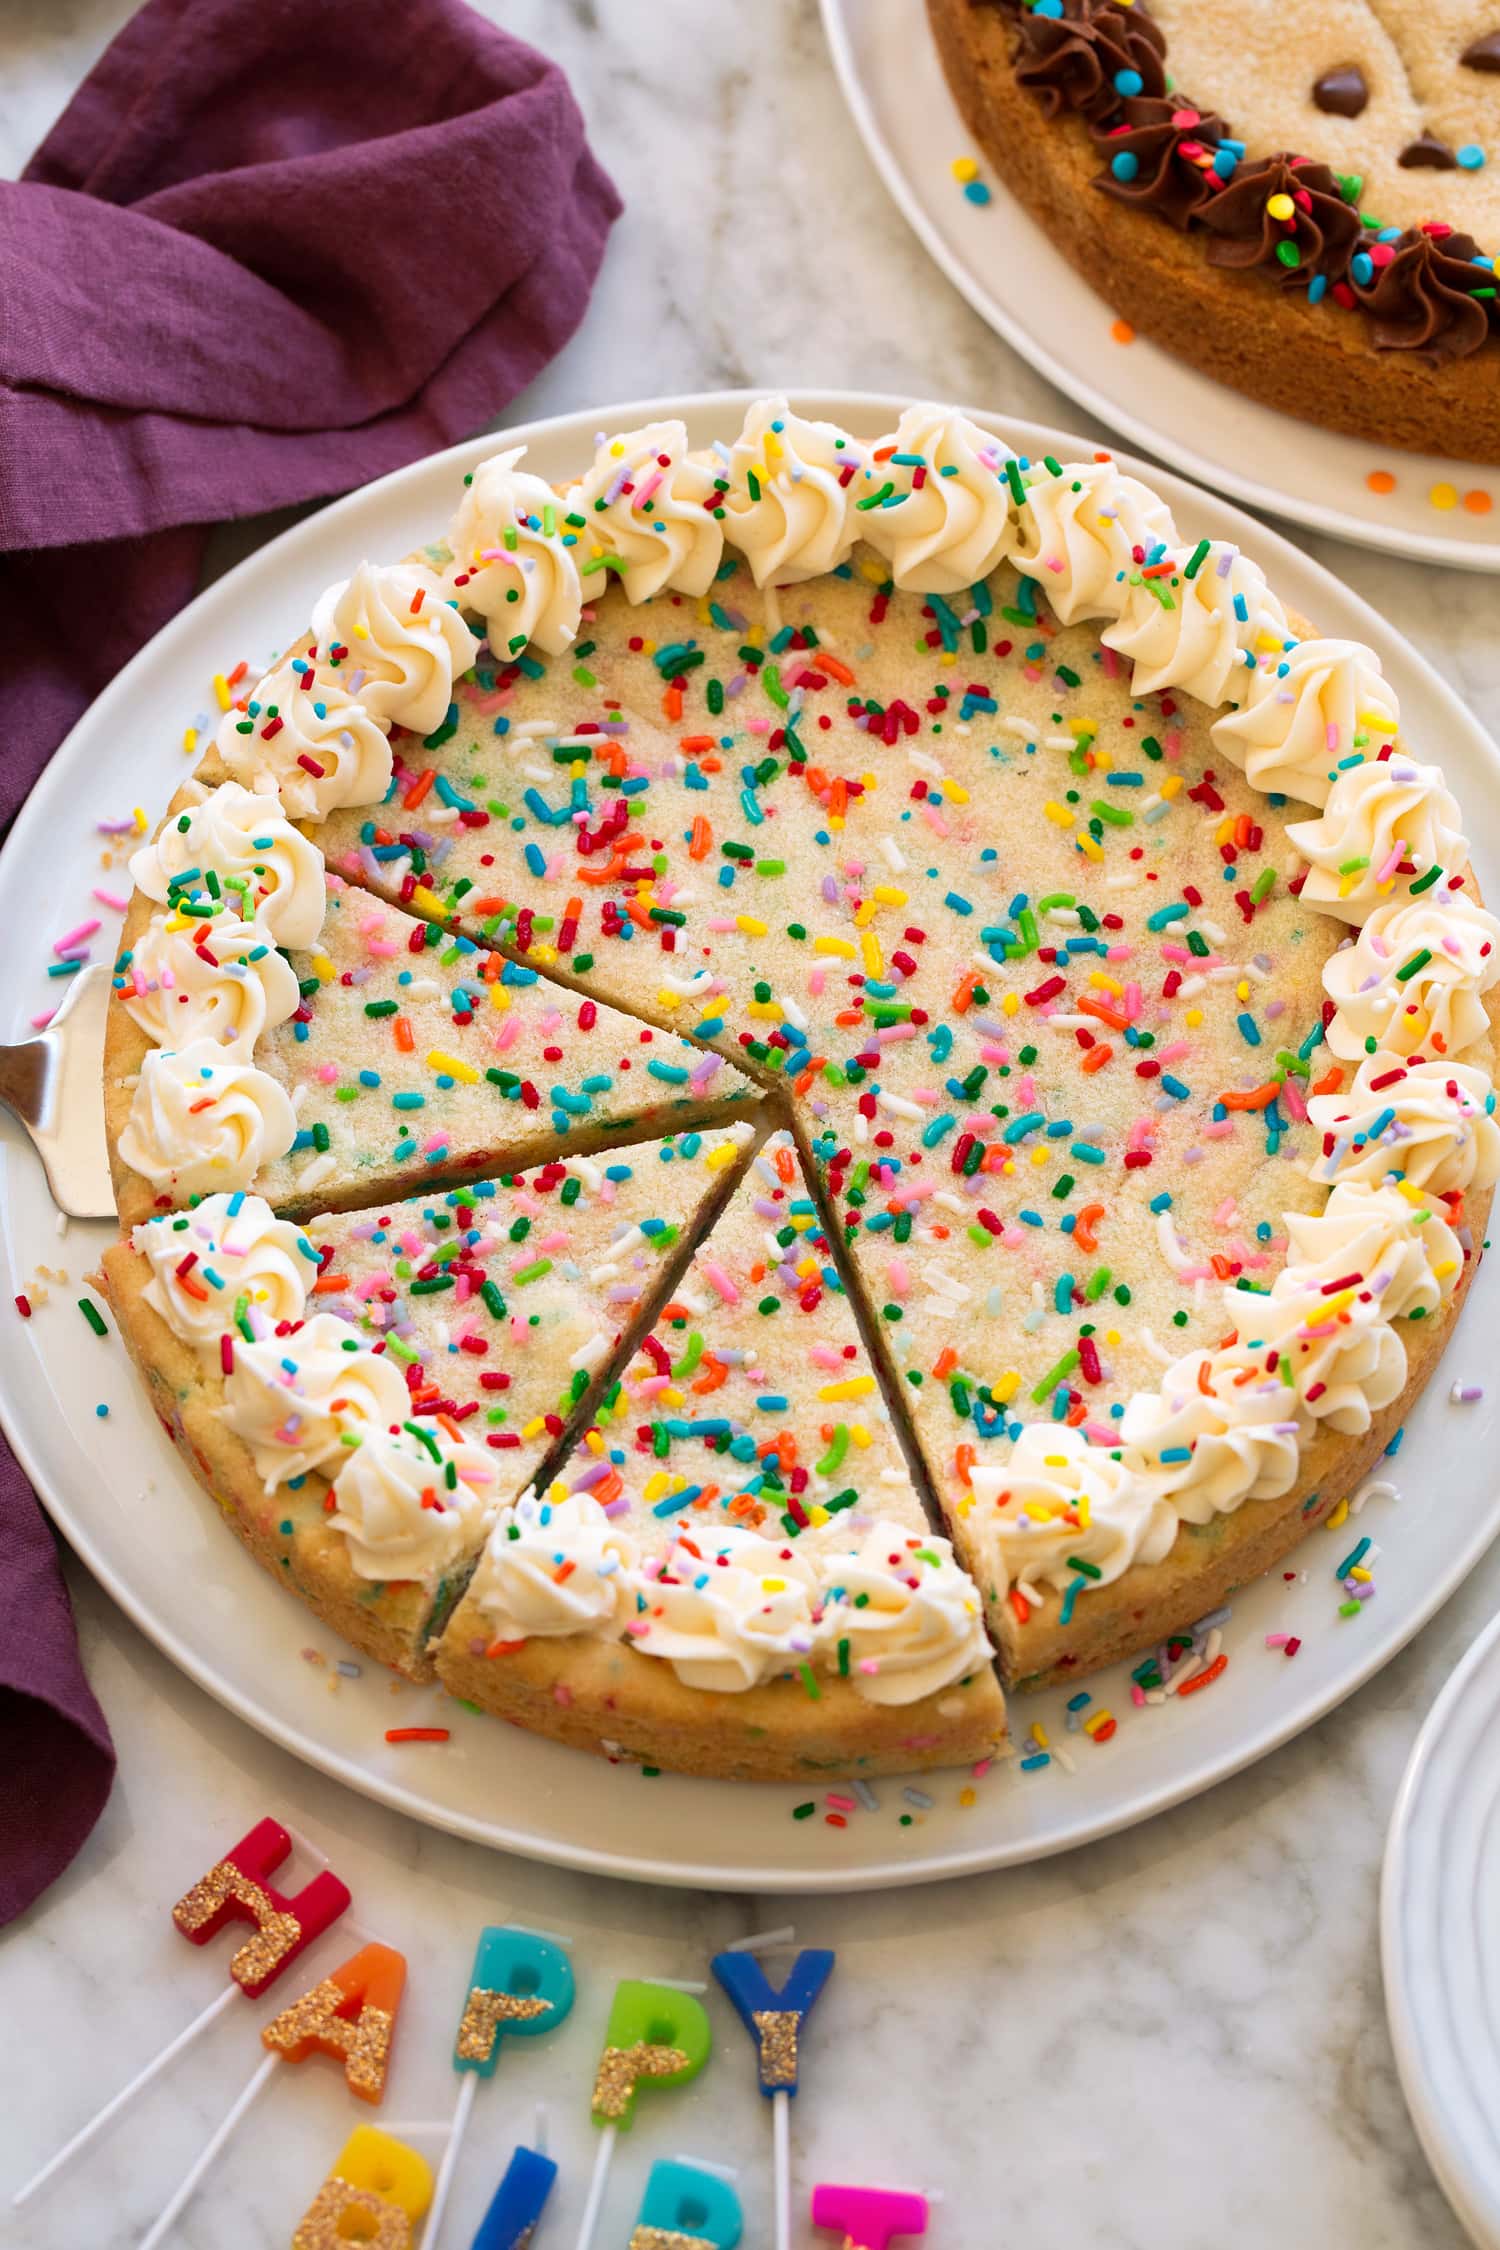 Whole sugar cookie cake with frosting on edges.